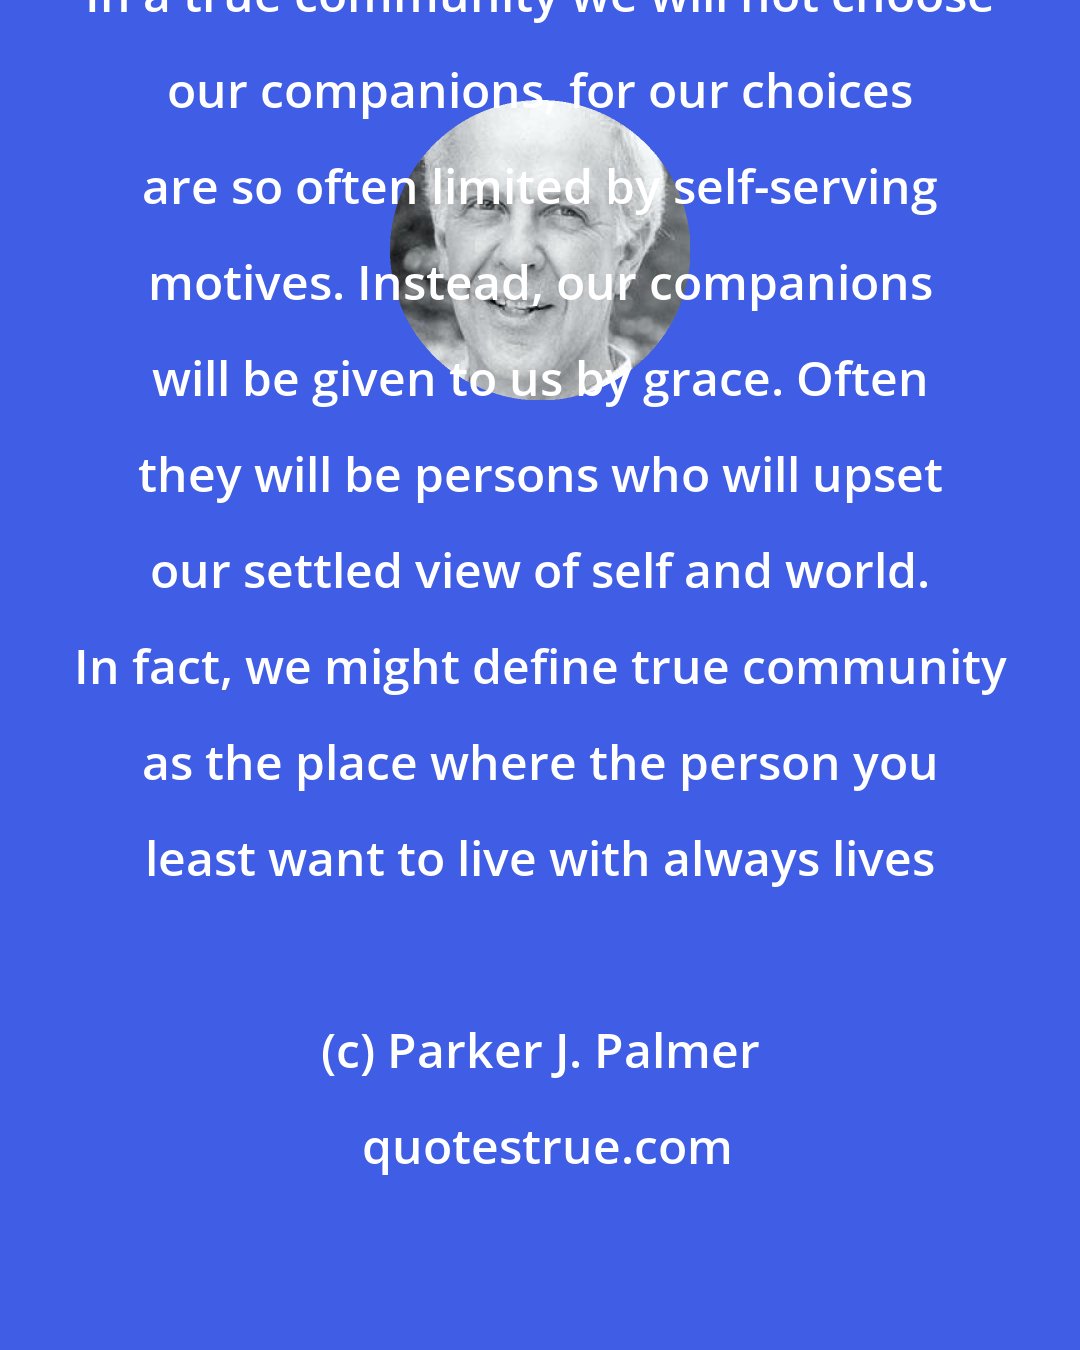 Parker J. Palmer: In a true community we will not choose our companions, for our choices are so often limited by self-serving motives. Instead, our companions will be given to us by grace. Often they will be persons who will upset our settled view of self and world. In fact, we might define true community as the place where the person you least want to live with always lives